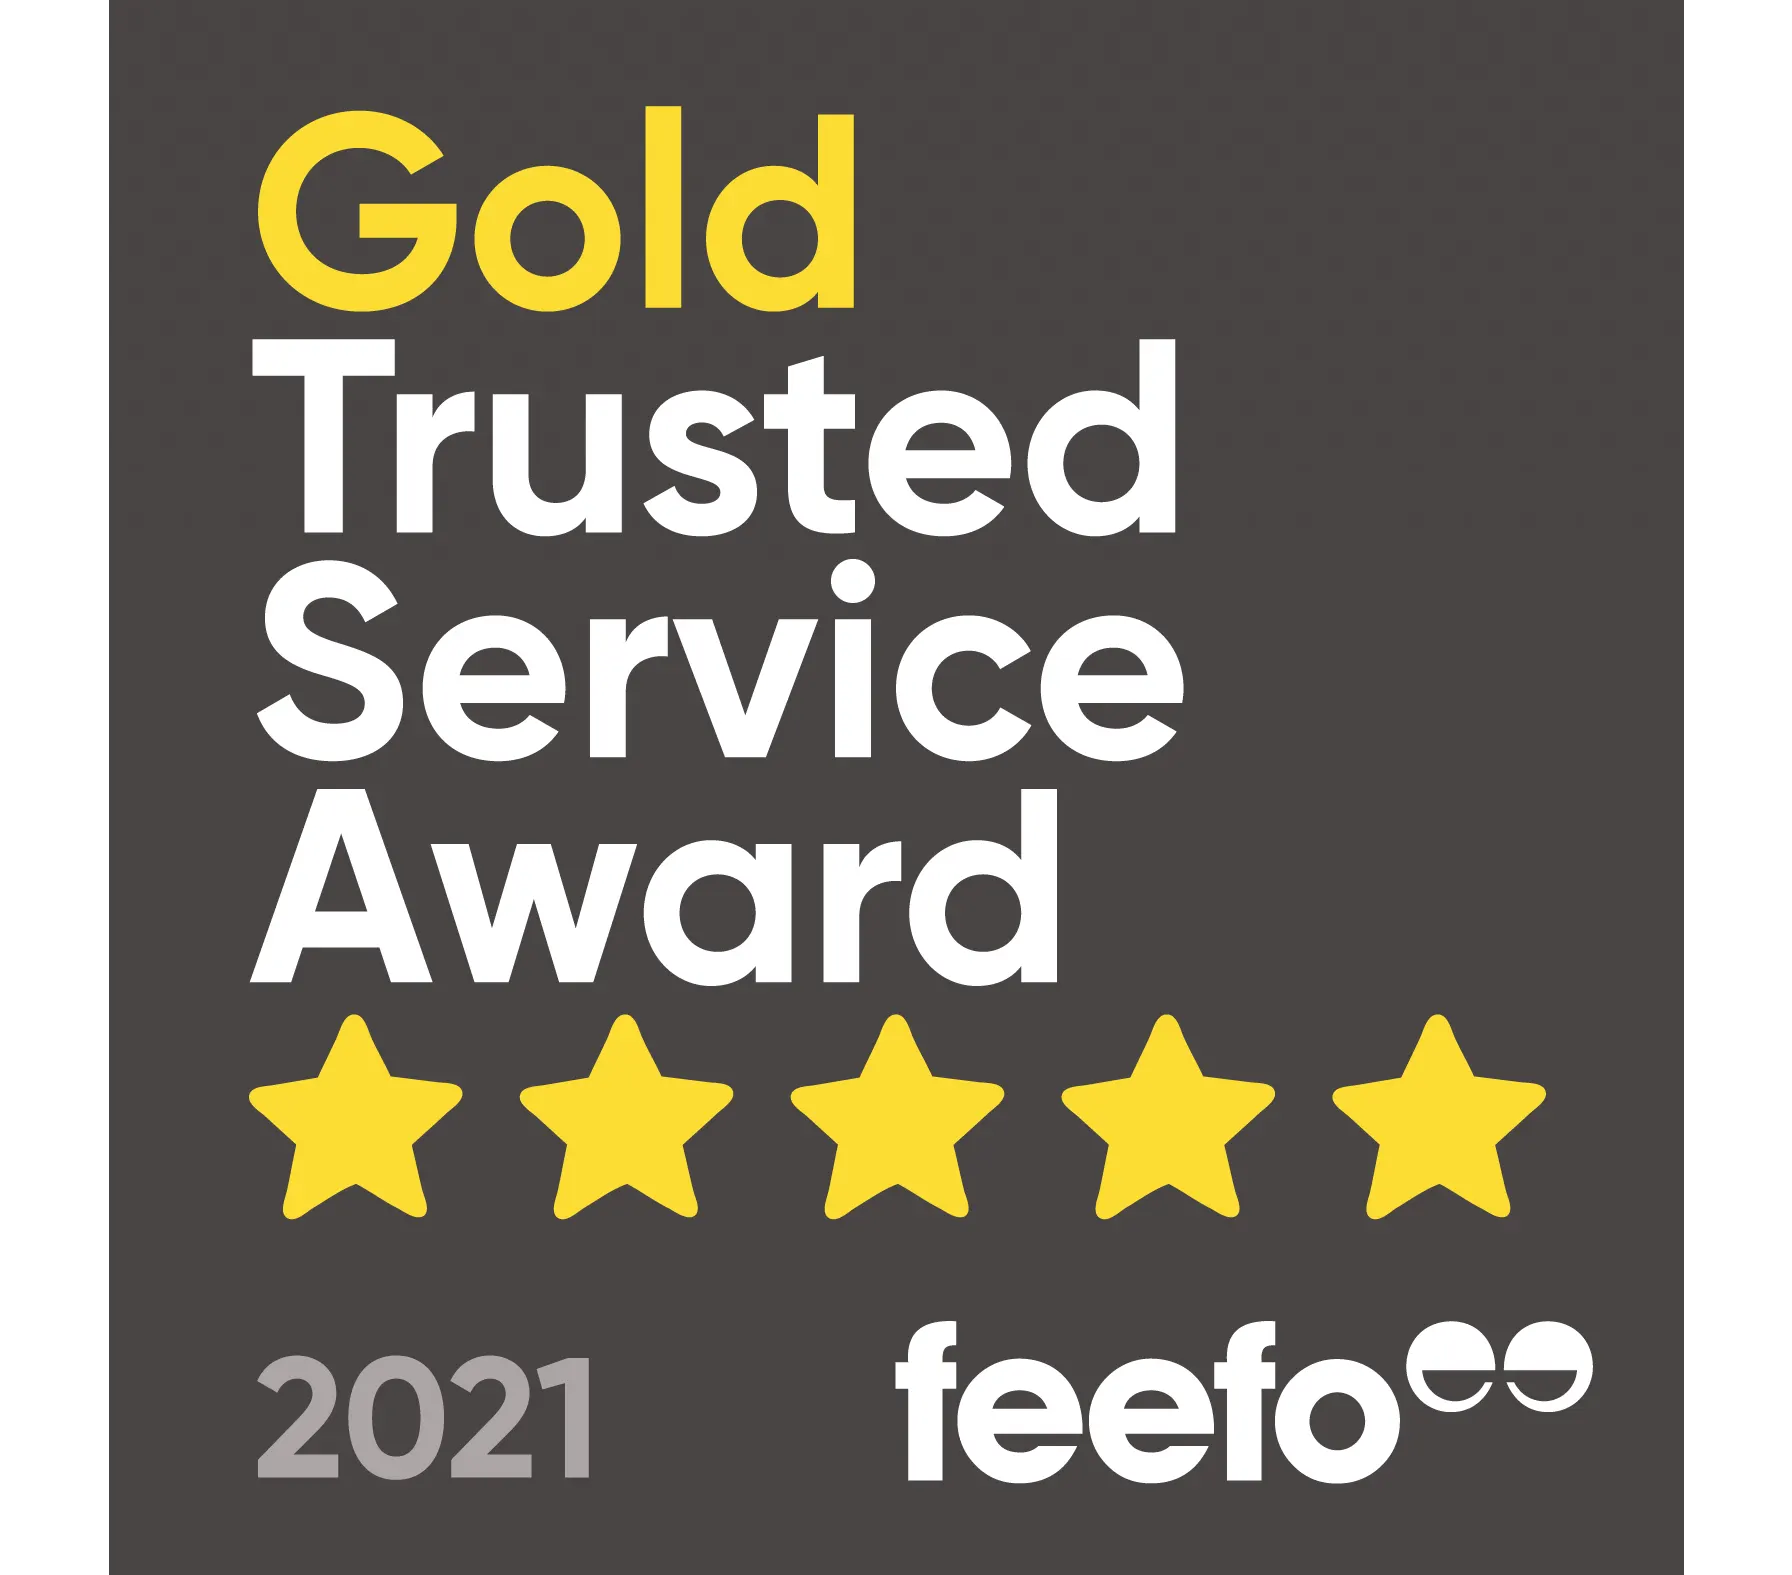 Winners of the Feefo Gold Trusted Service Award 2021